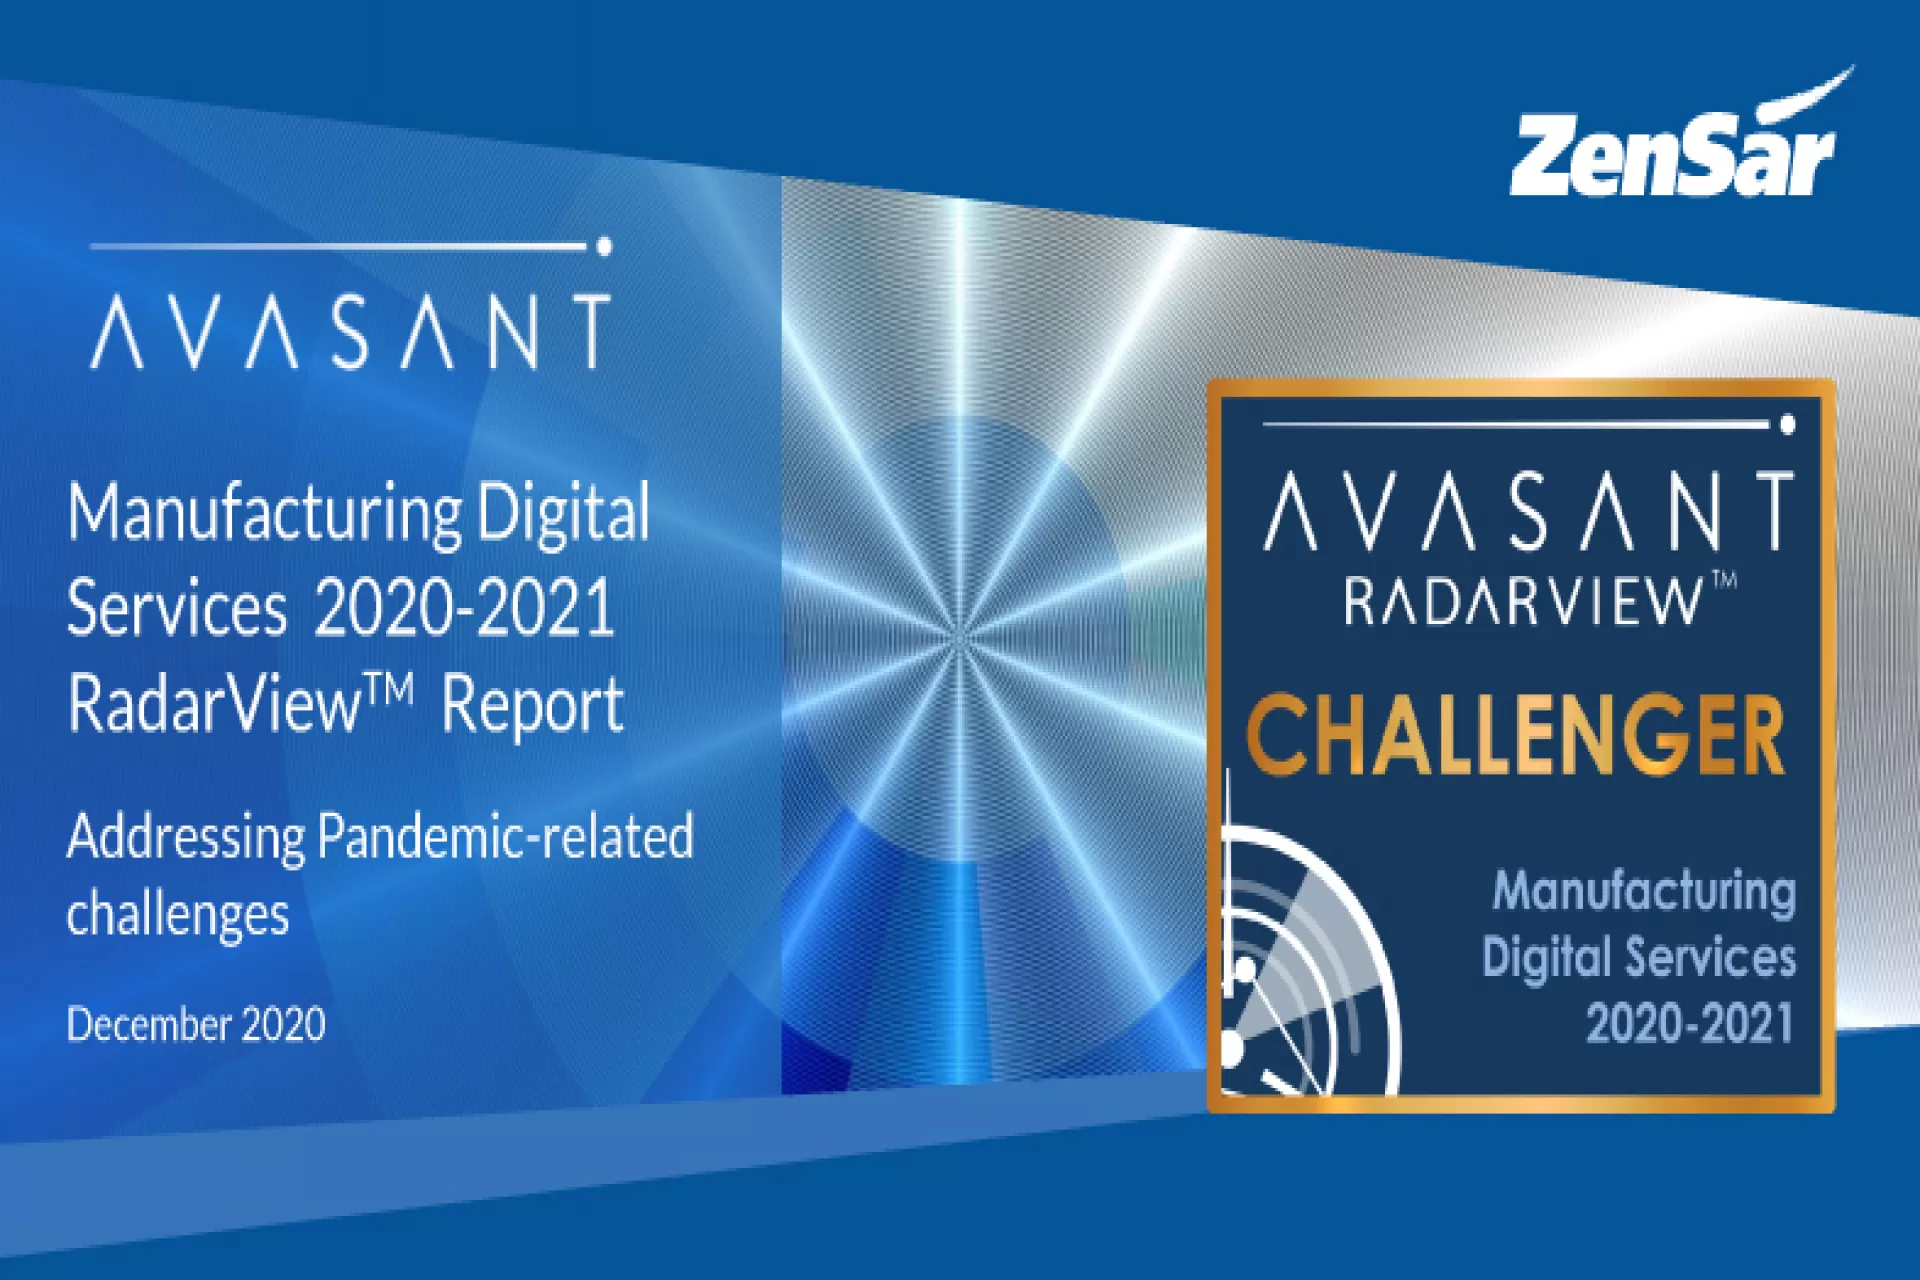 Zensar has been recognized as a Challenger in Avasant’s Manufacturing Digital Services 2020-2021 RadarView™ Report